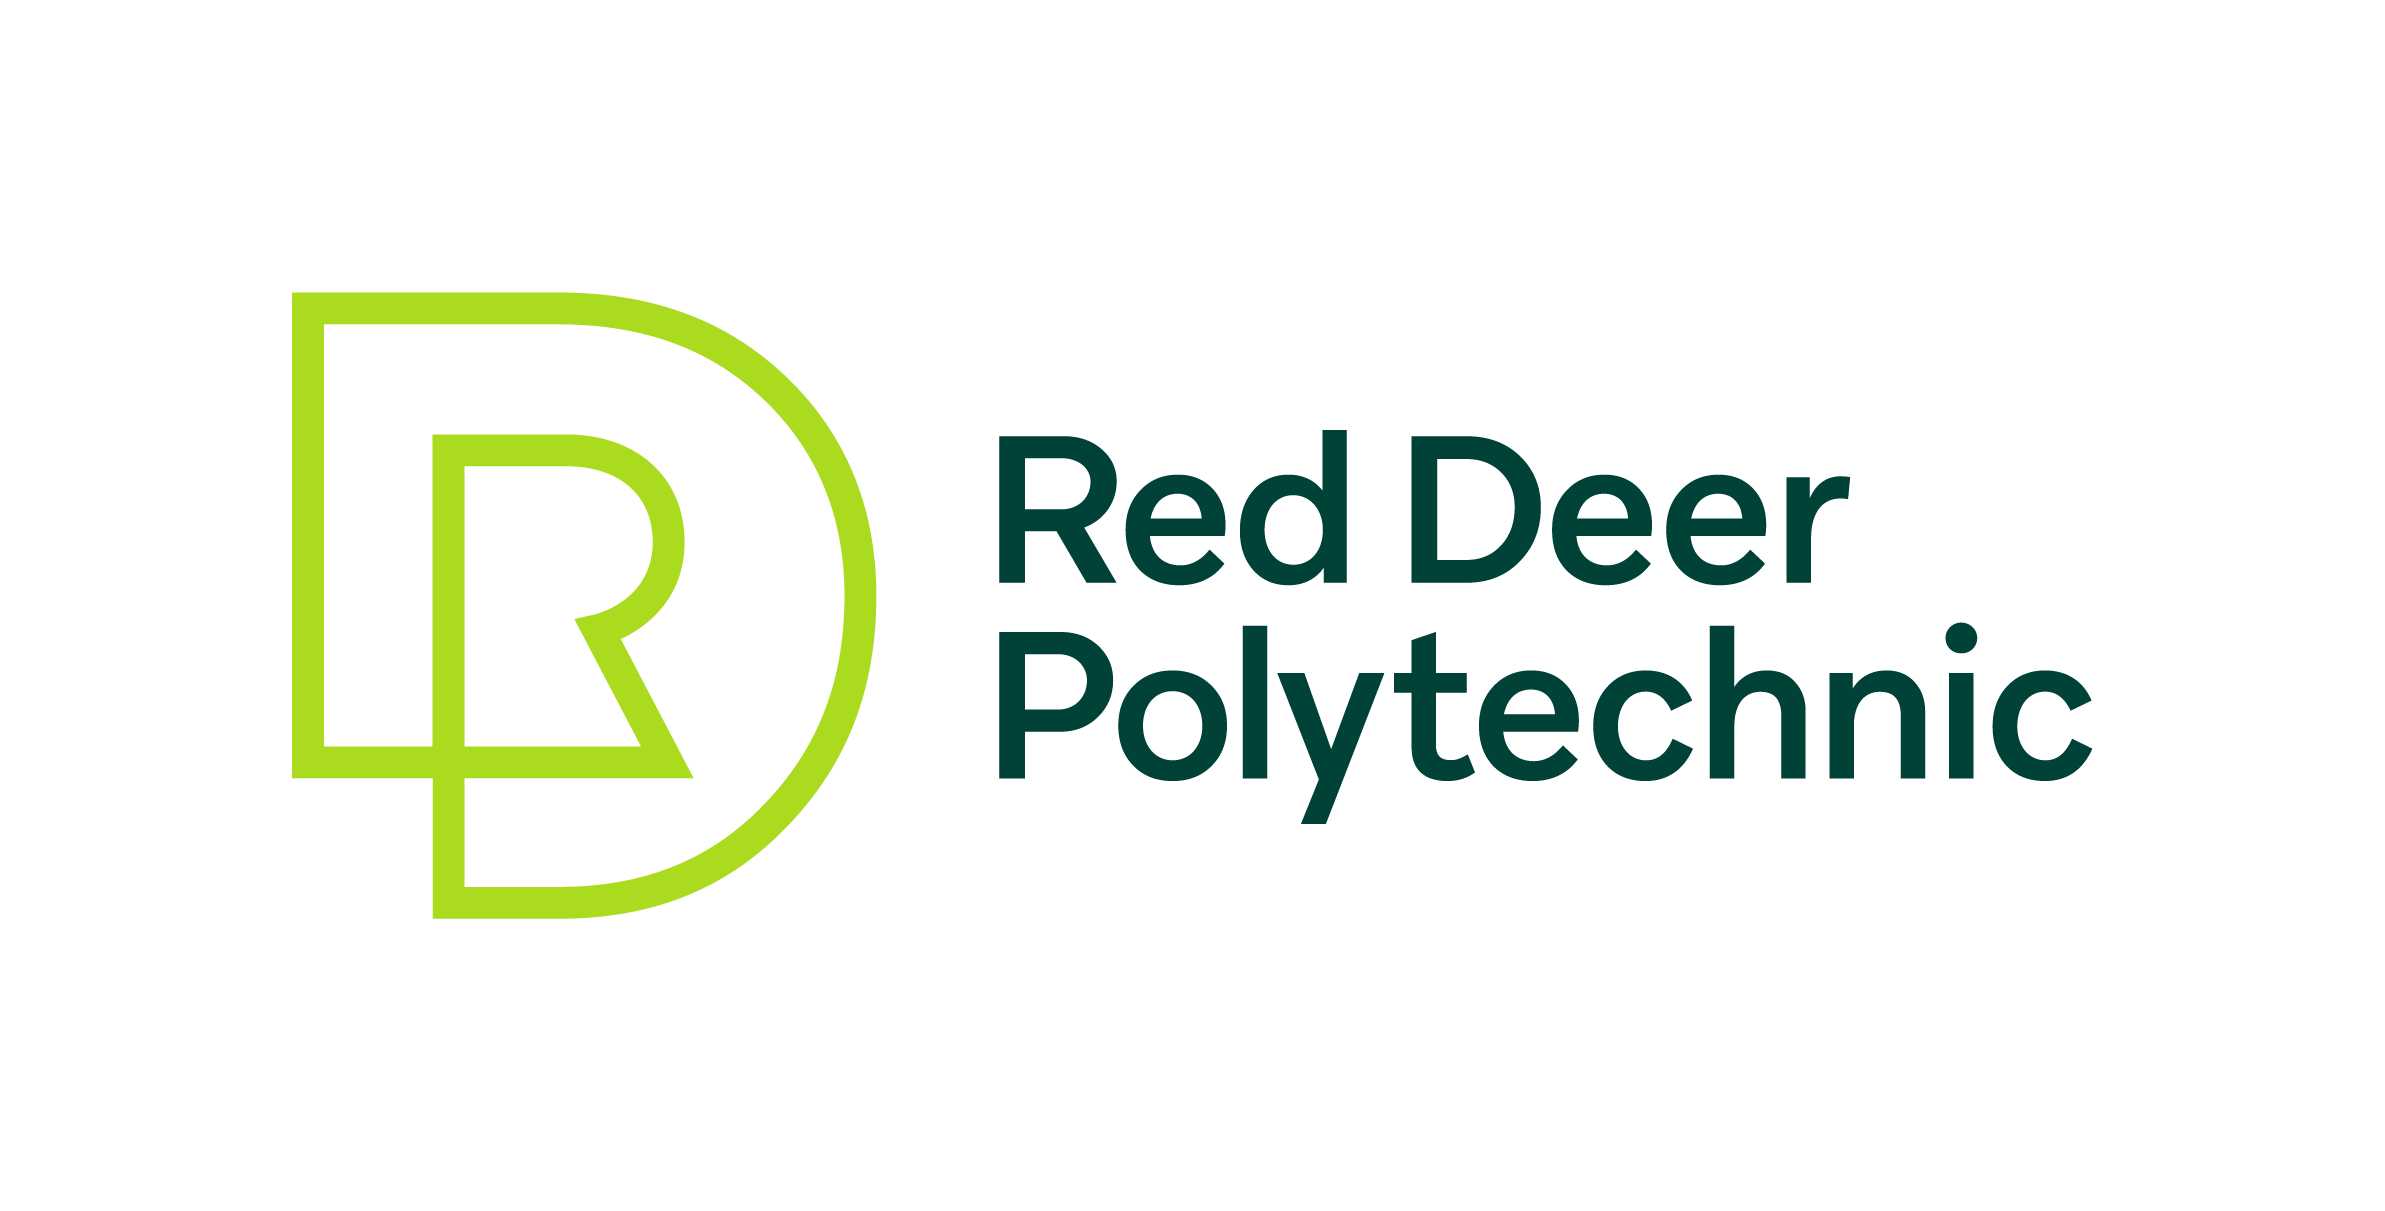 Red Deer Polytechnic Testing Services  Exam Registration